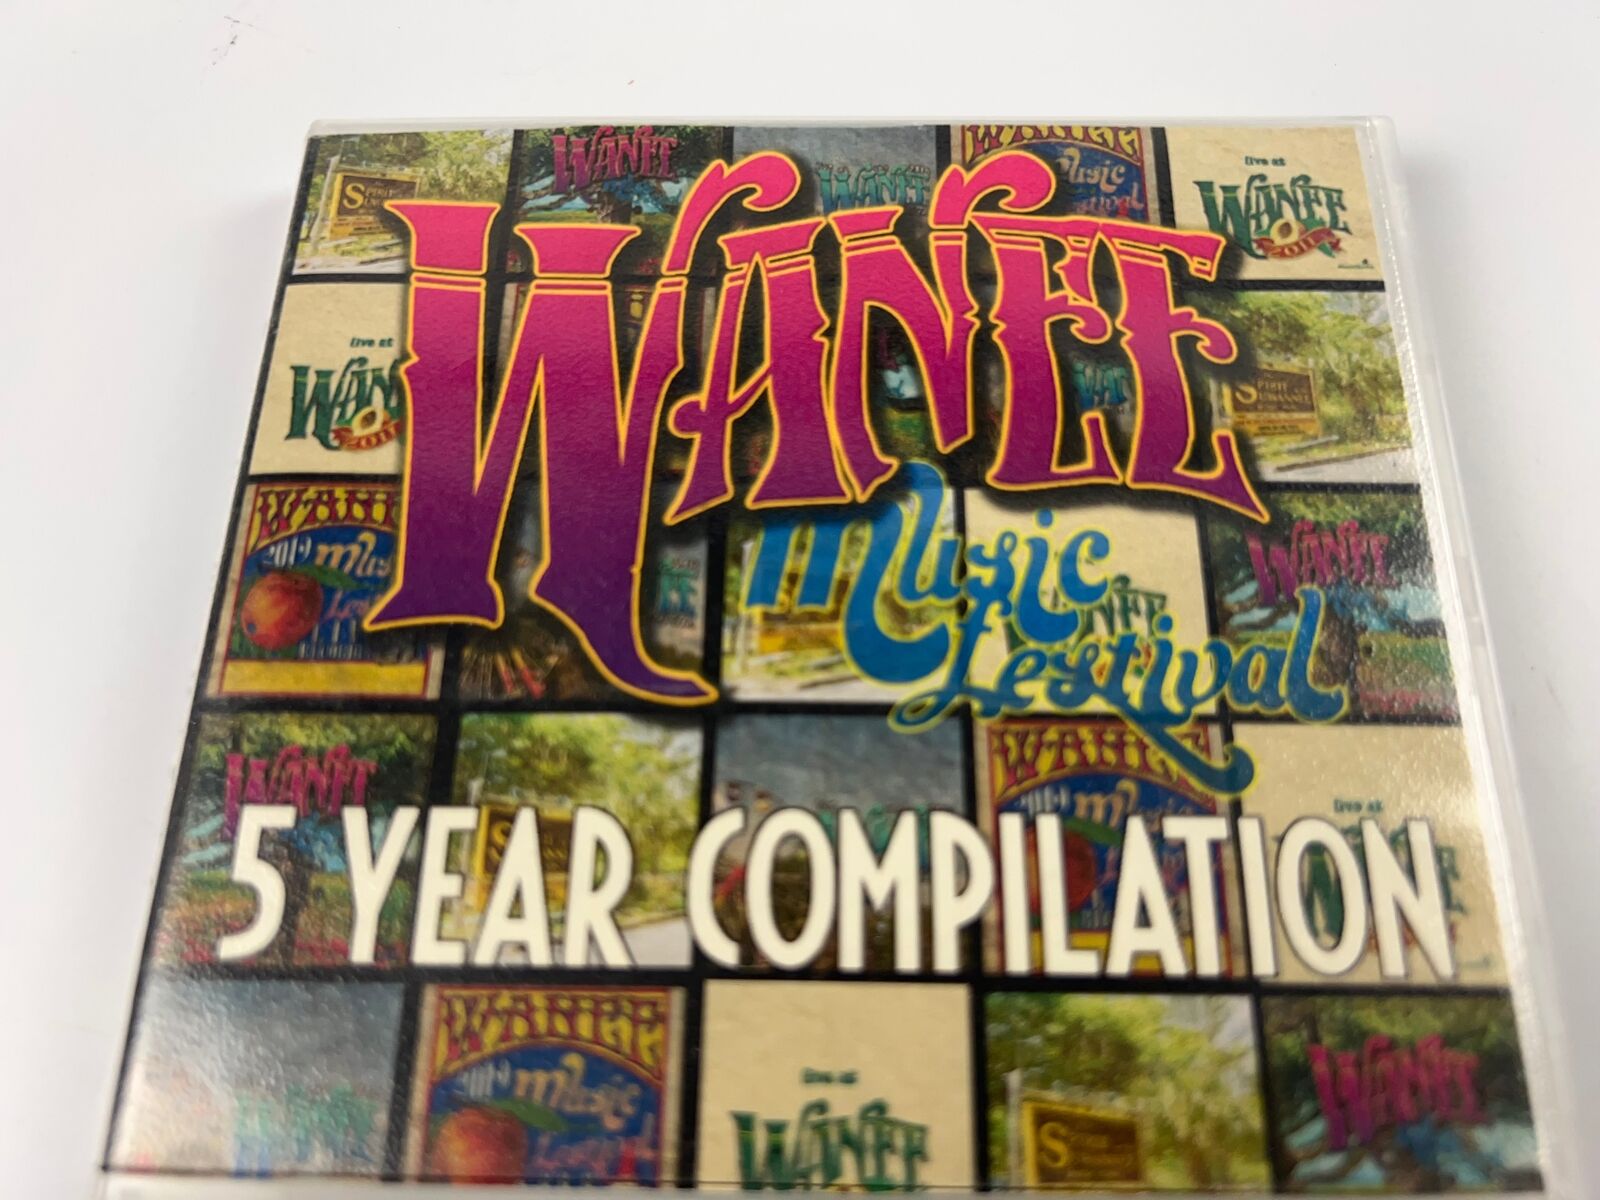 Wanee Music Festival 5 Year Compilation 3 CD Set